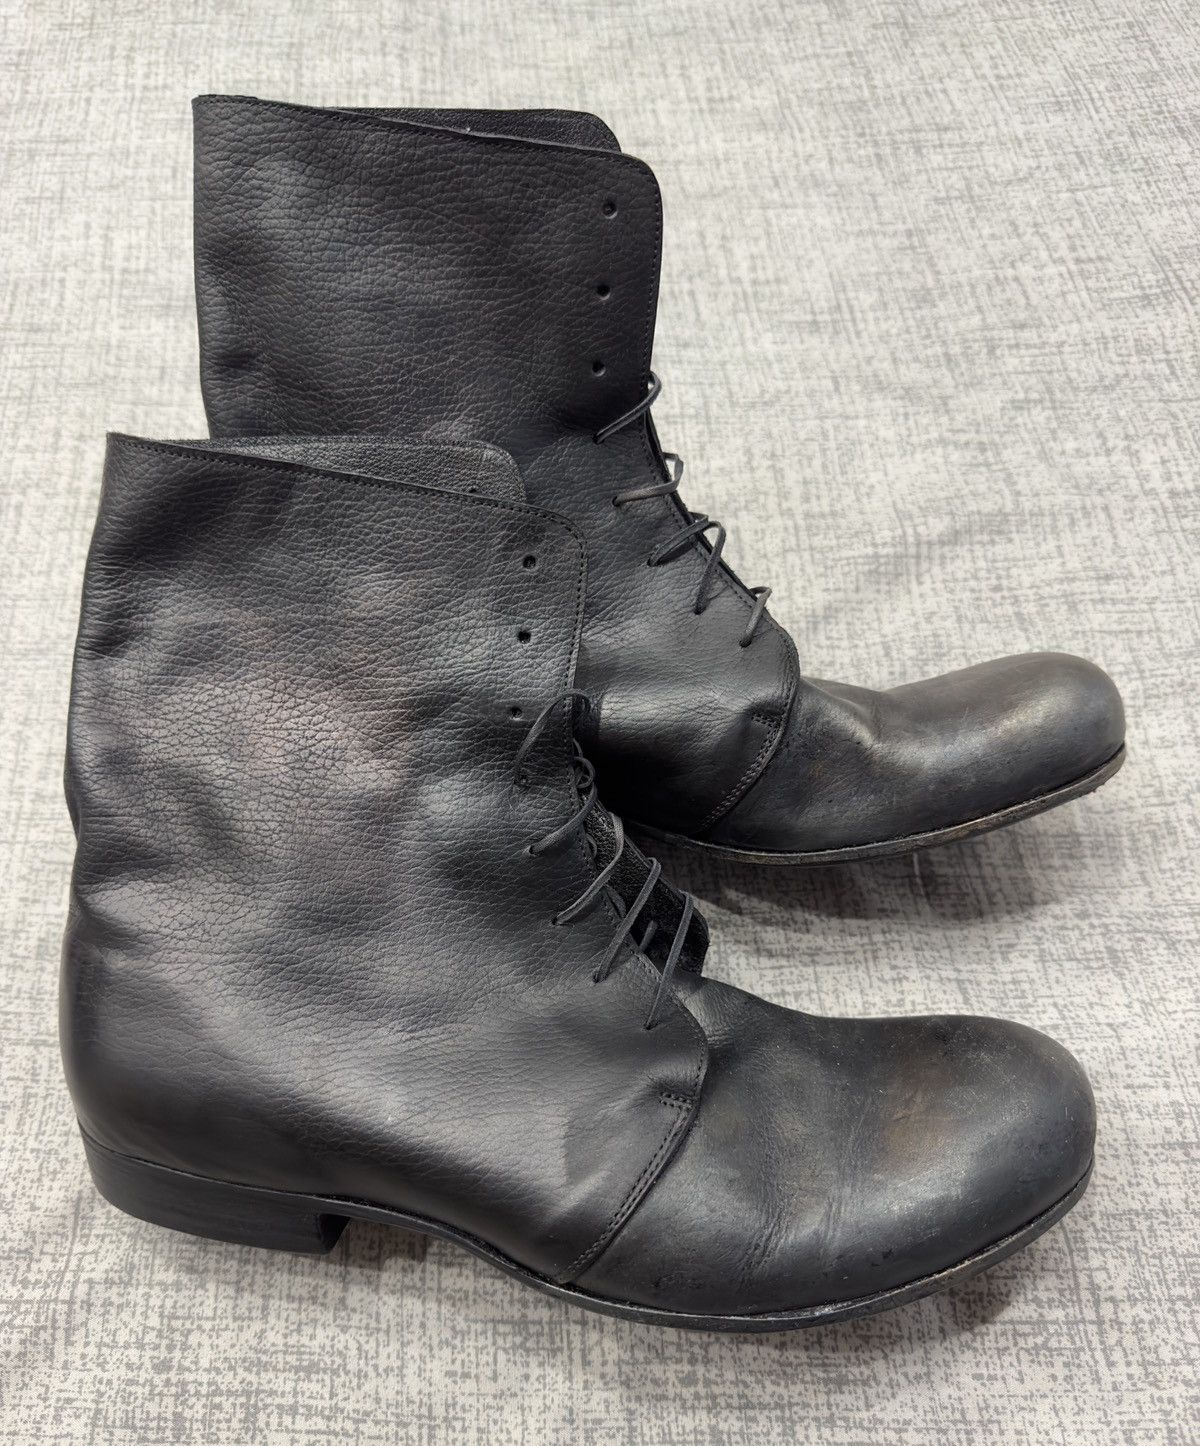 Dimissianos And Miller Rare Dimissianos & Miller Boots | Grailed